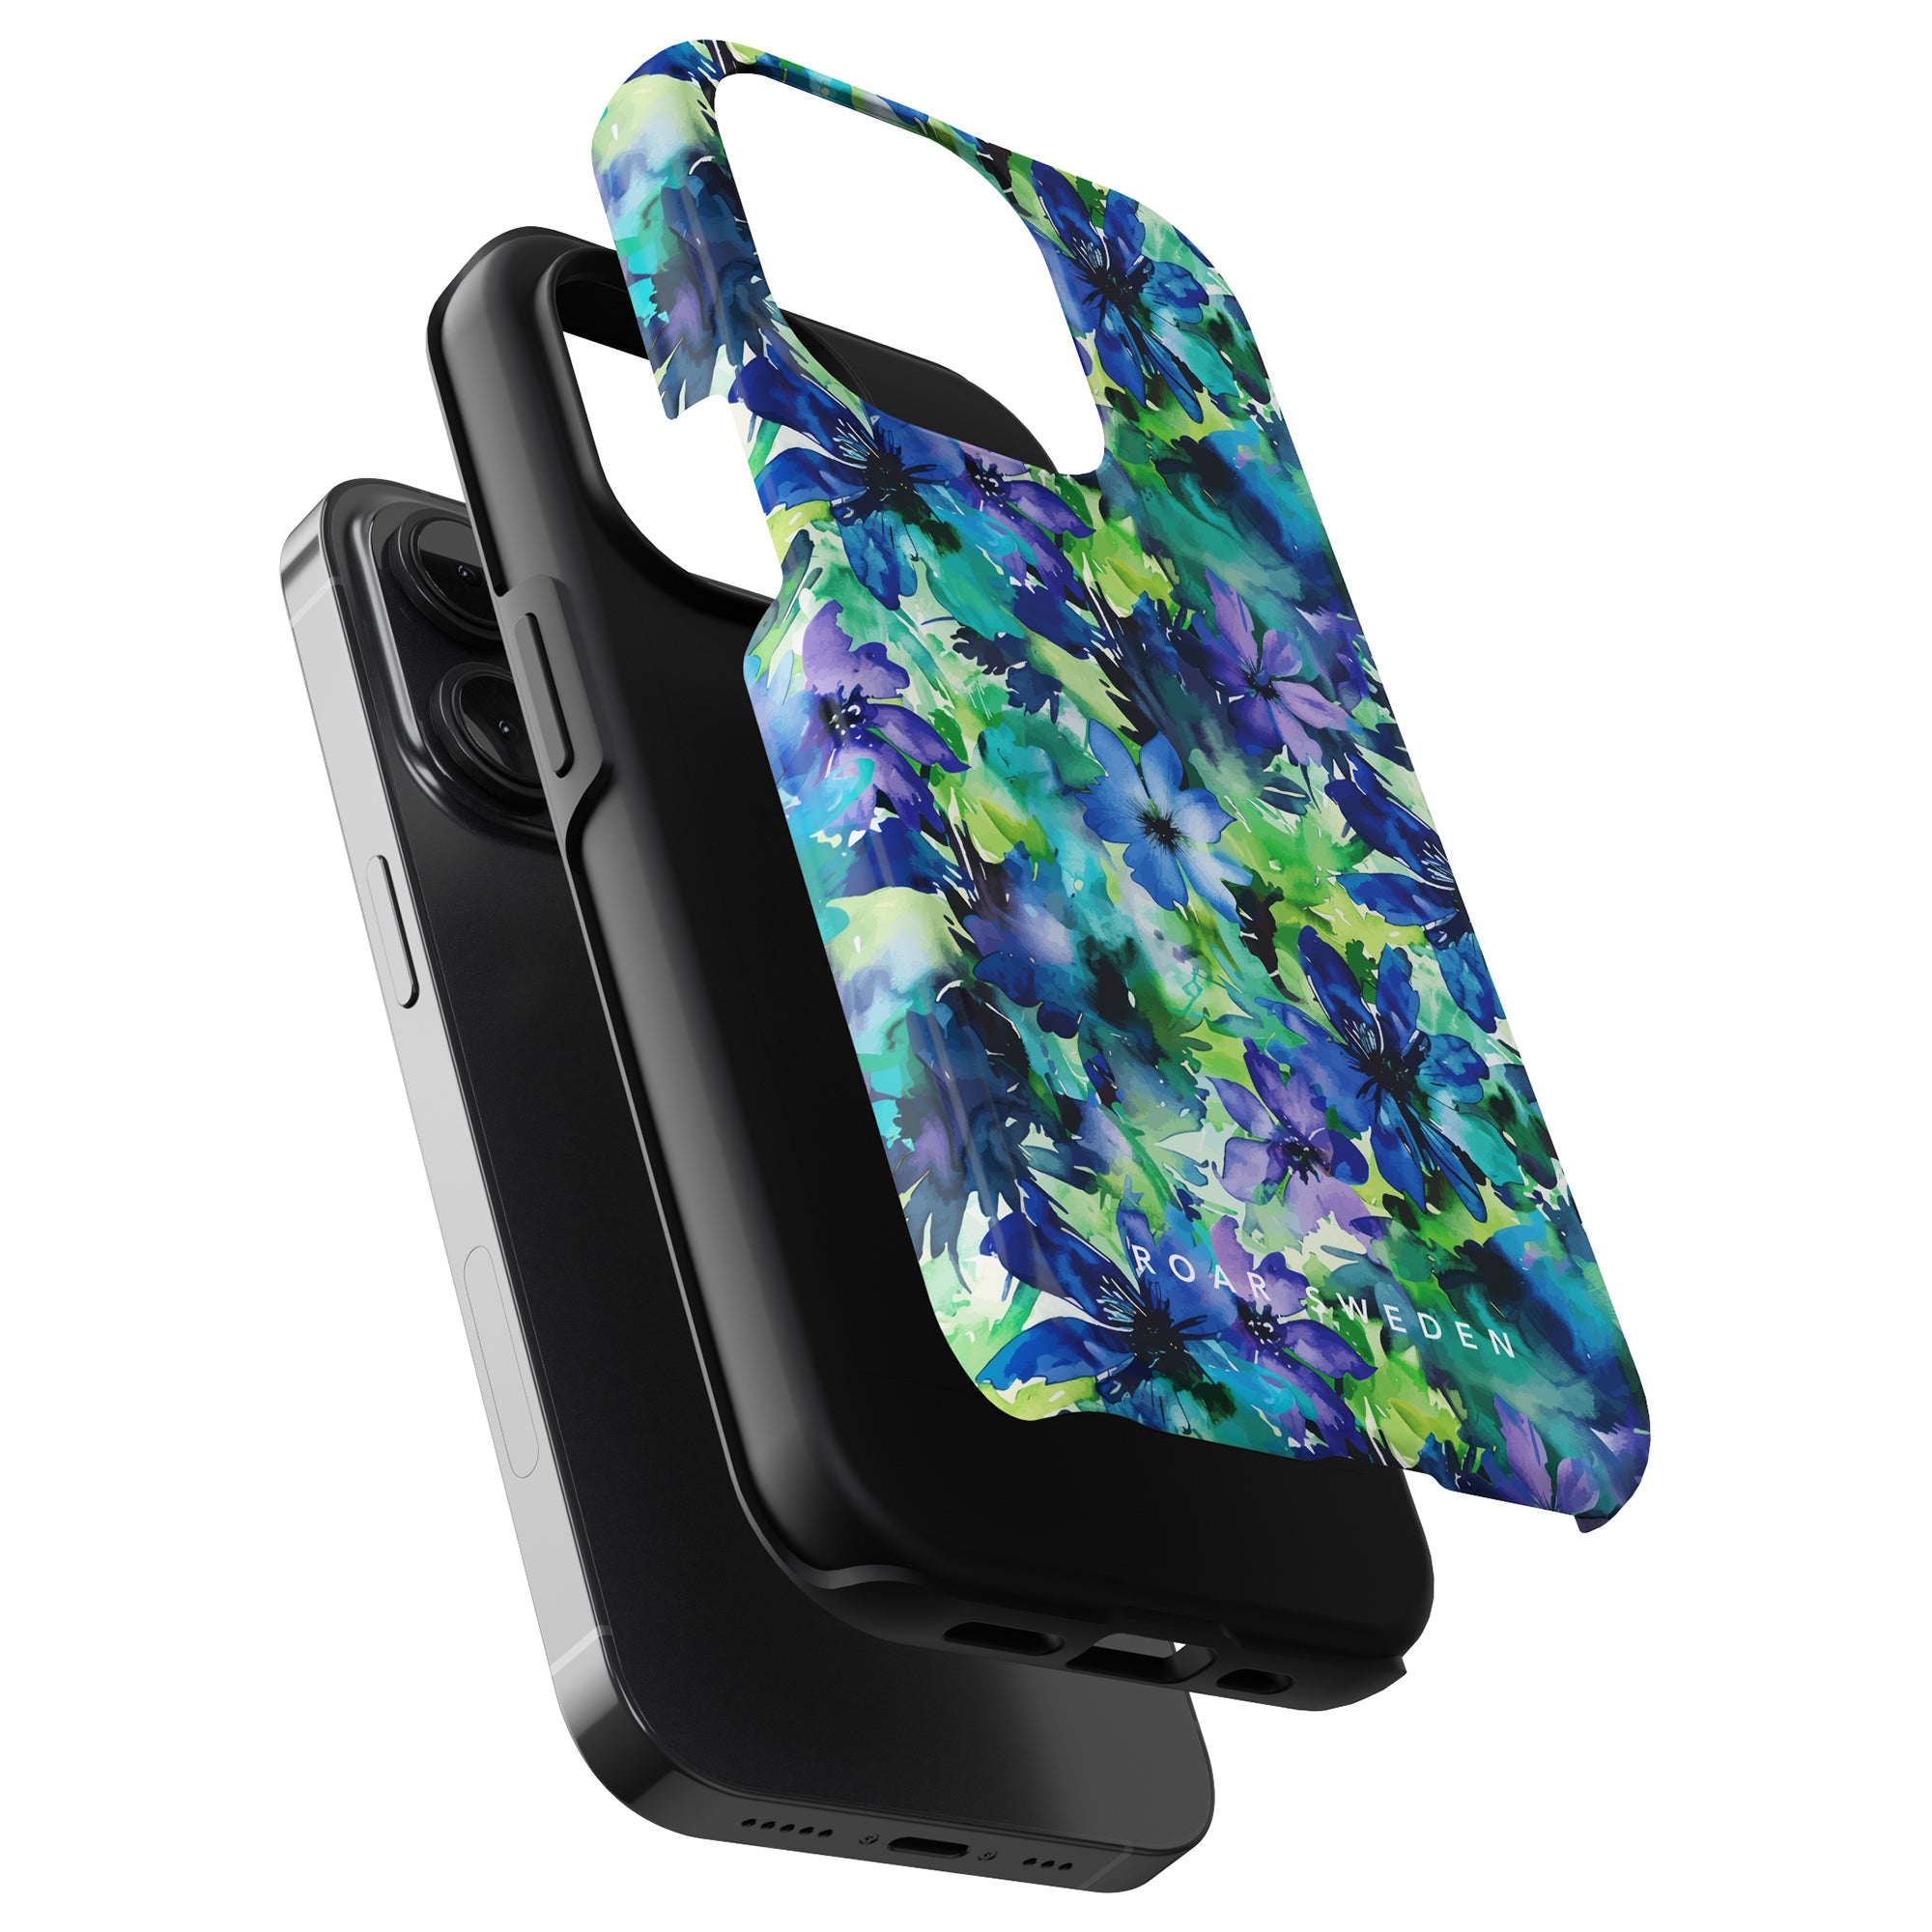 A vibrant floral phone case from the Sweet Flower - Tough Case is shown lifting off a Tough Case, revealing a smartphone underneath.